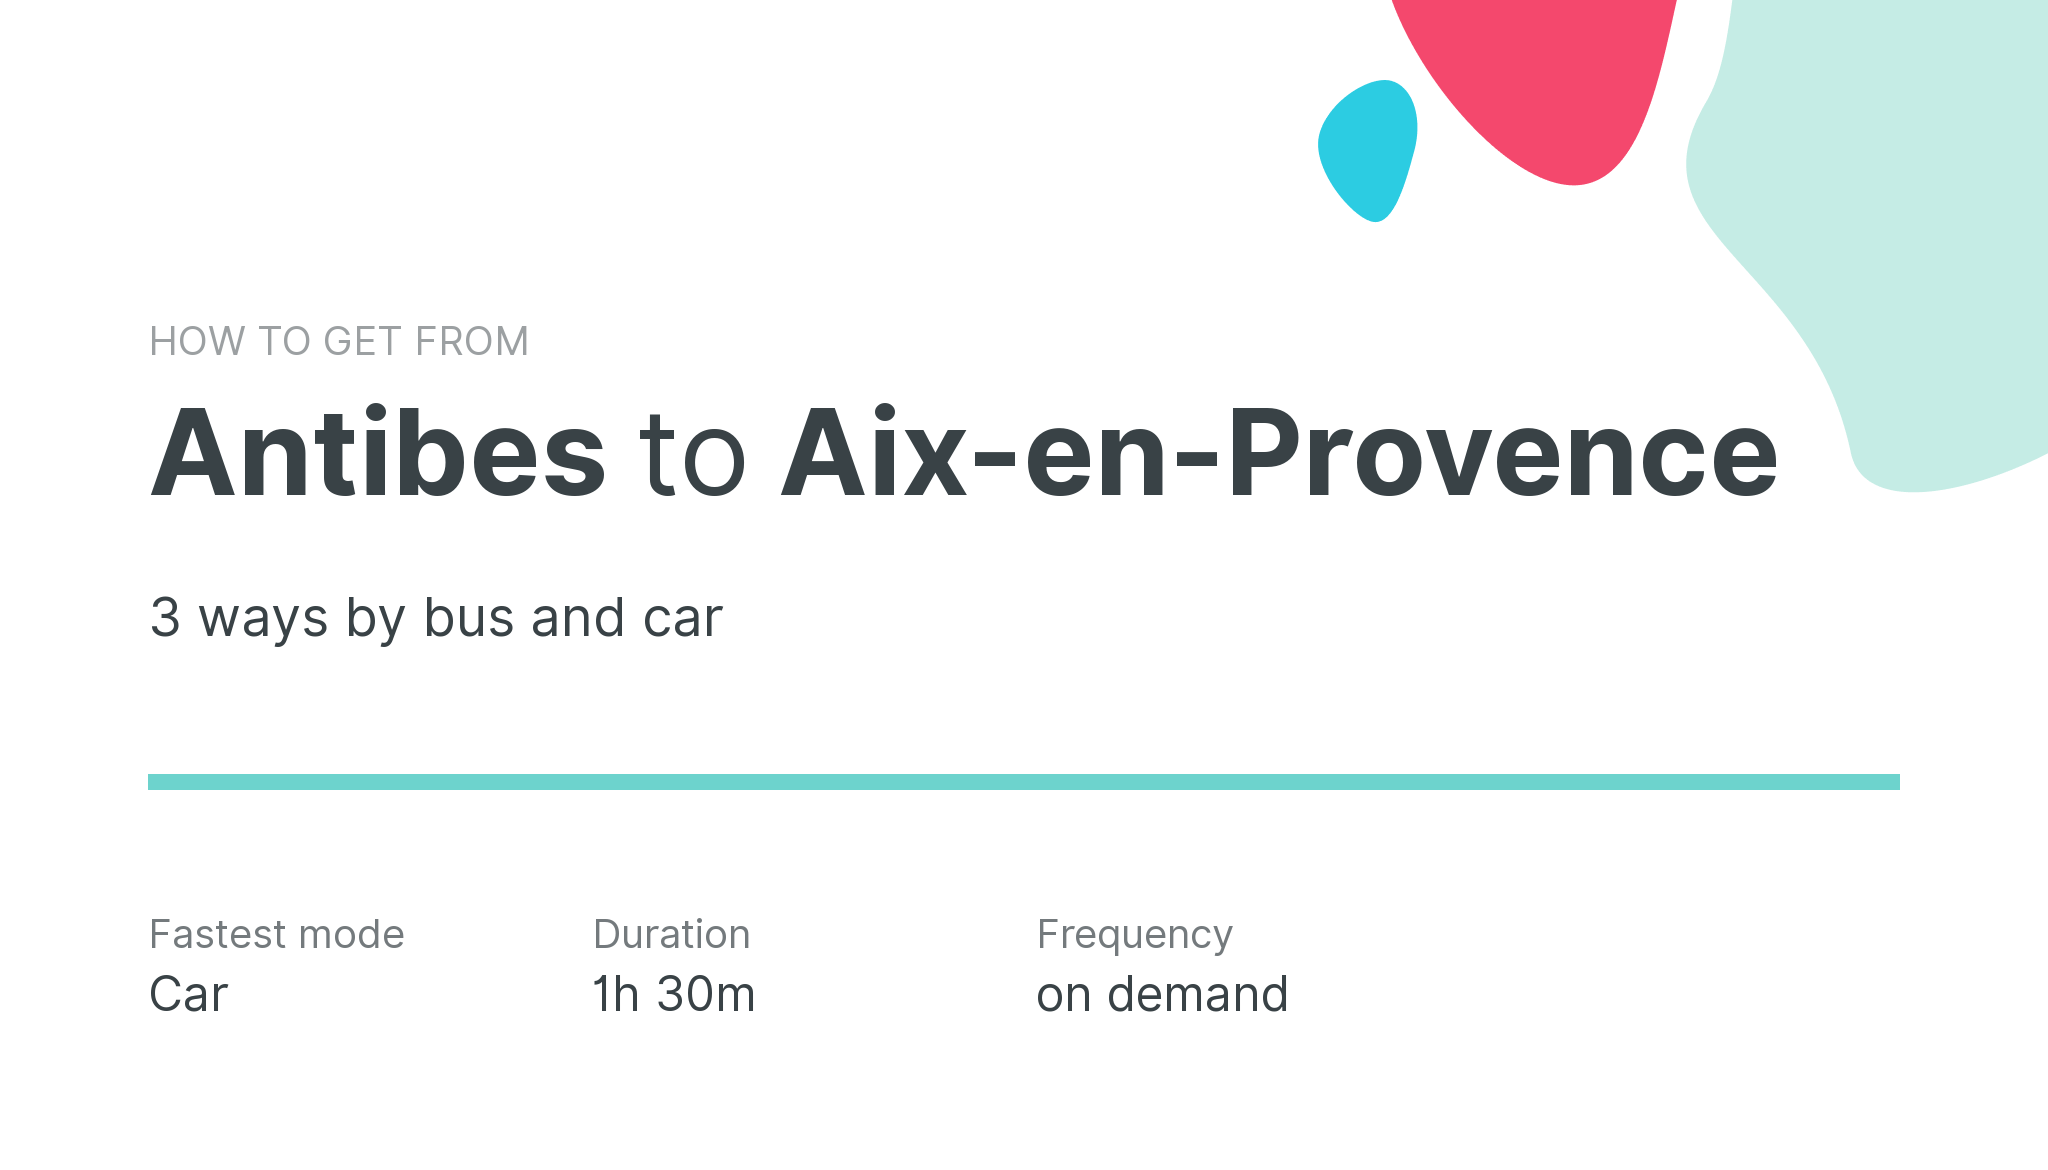 How do I get from Antibes to Aix-en-Provence